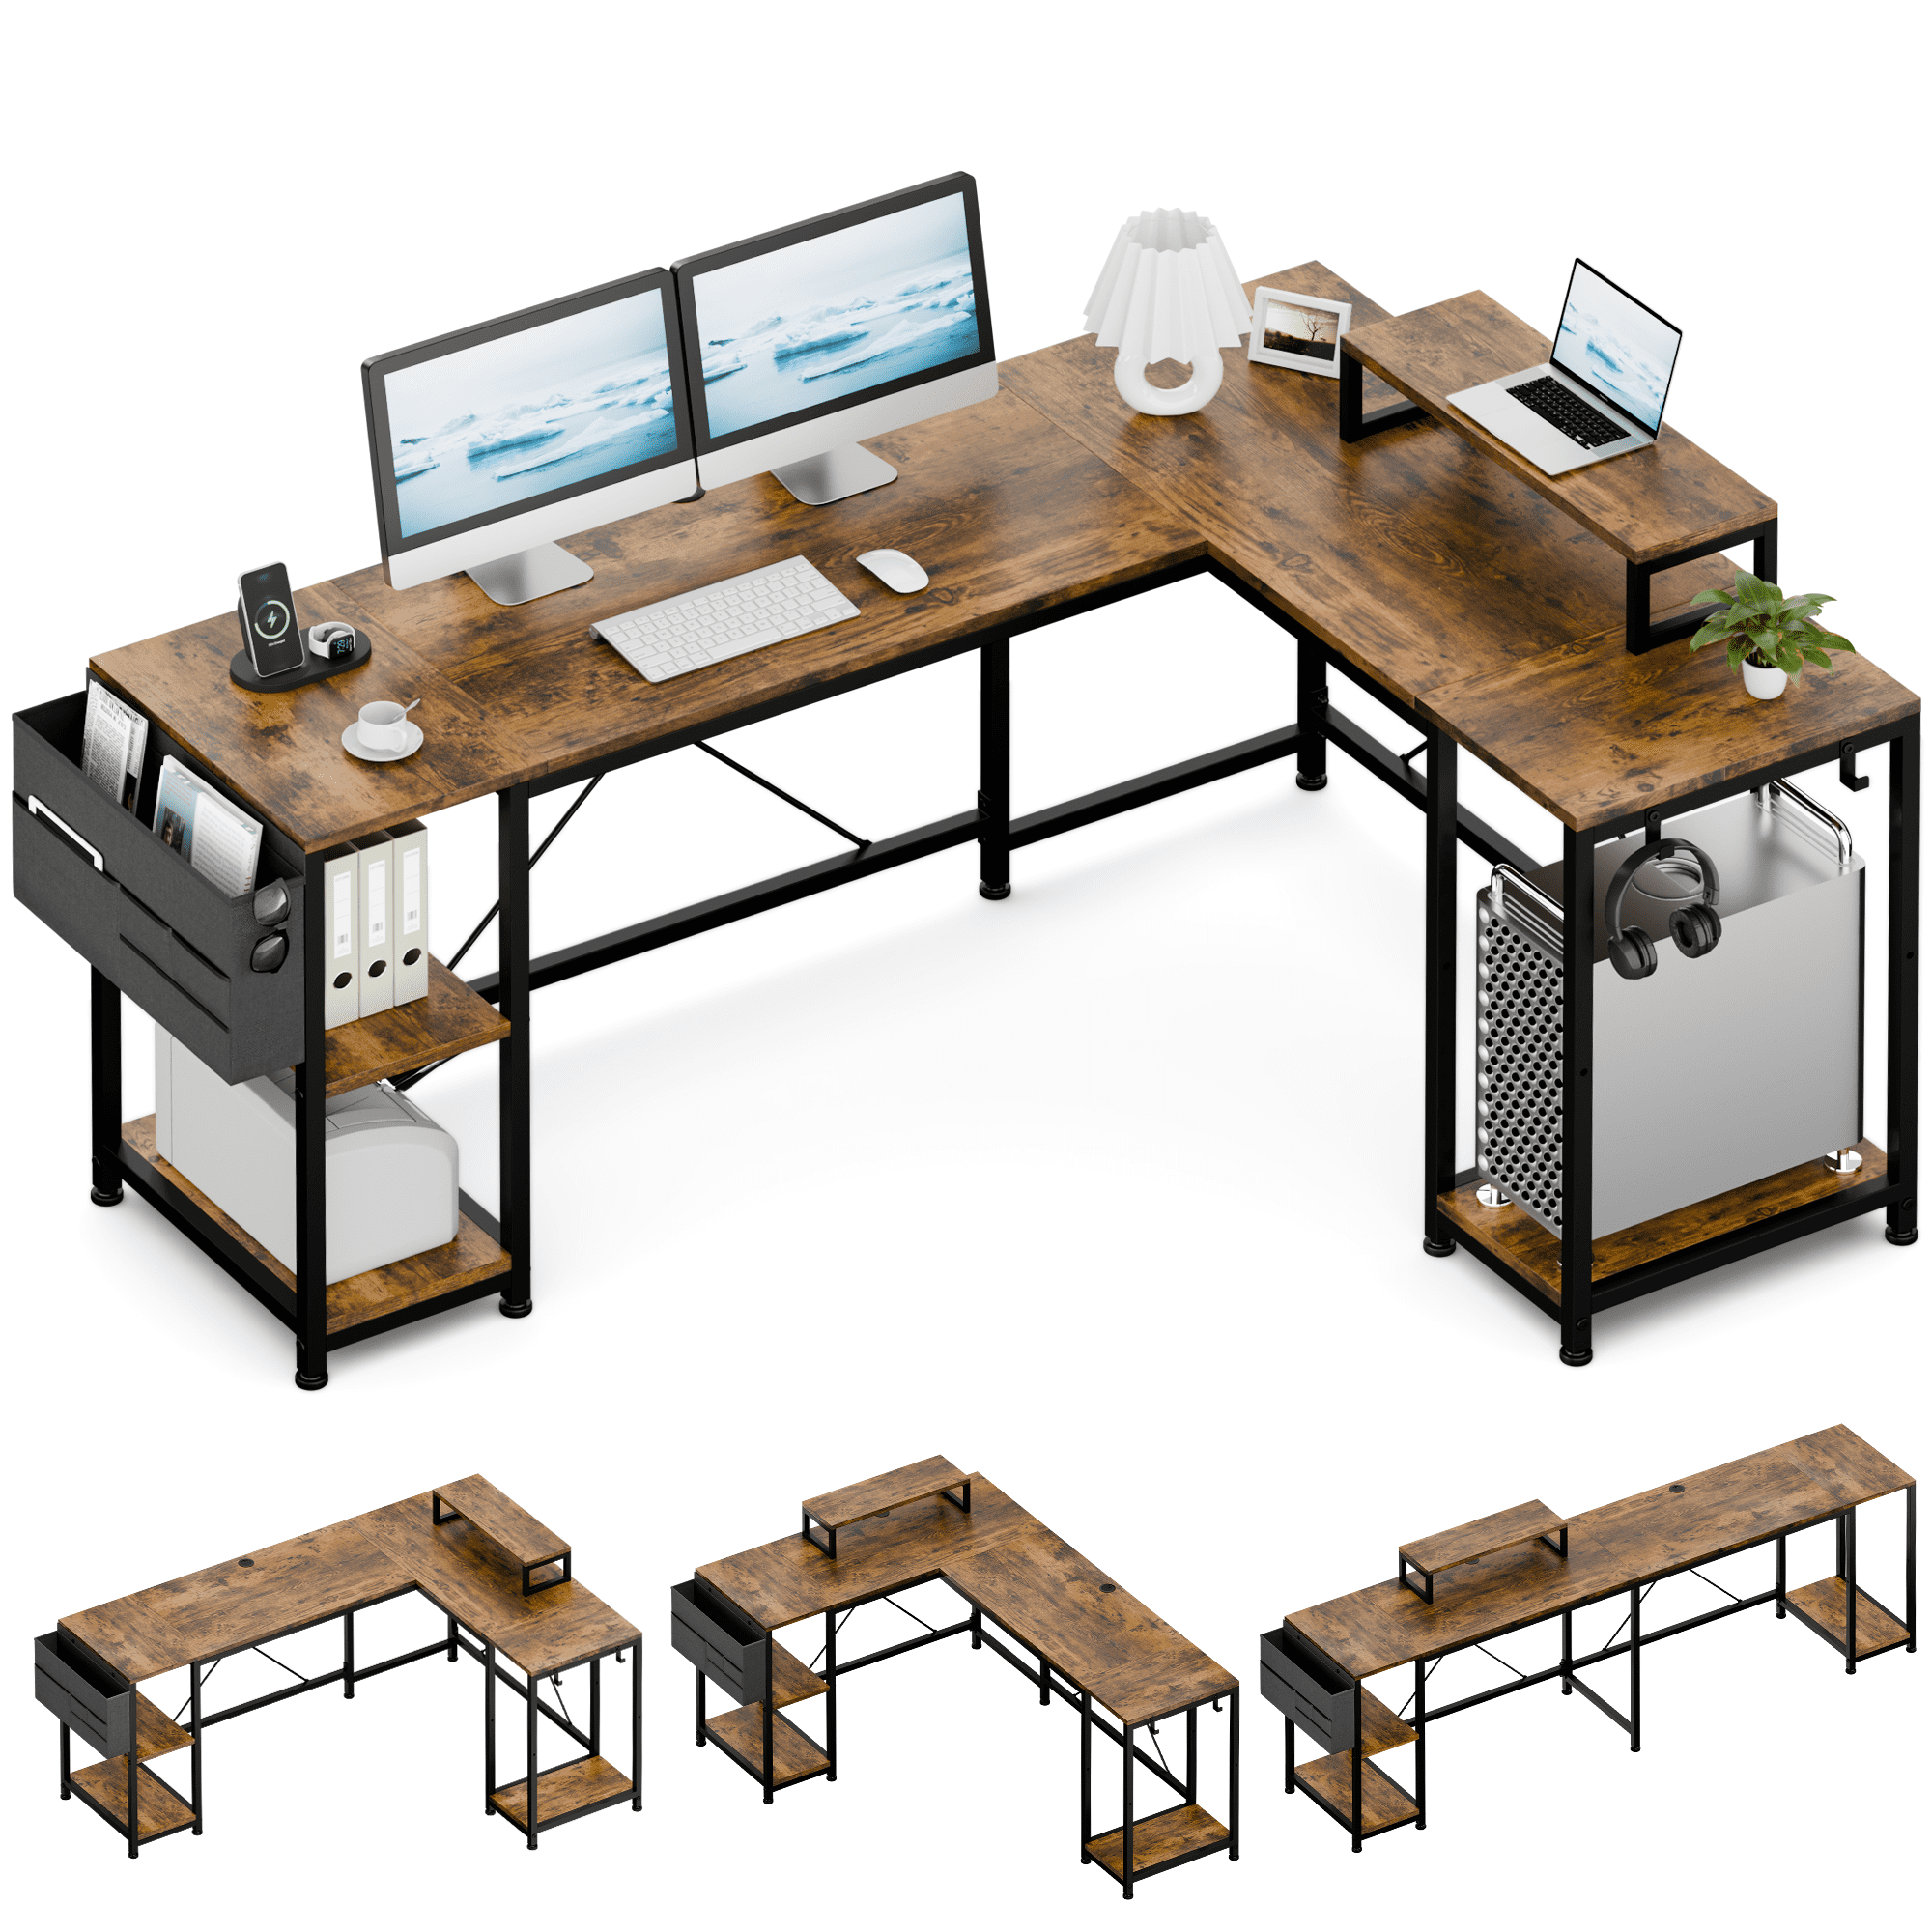 Desk with gadgets and office supplies. Stock Photo by ©halfpoint 103590282